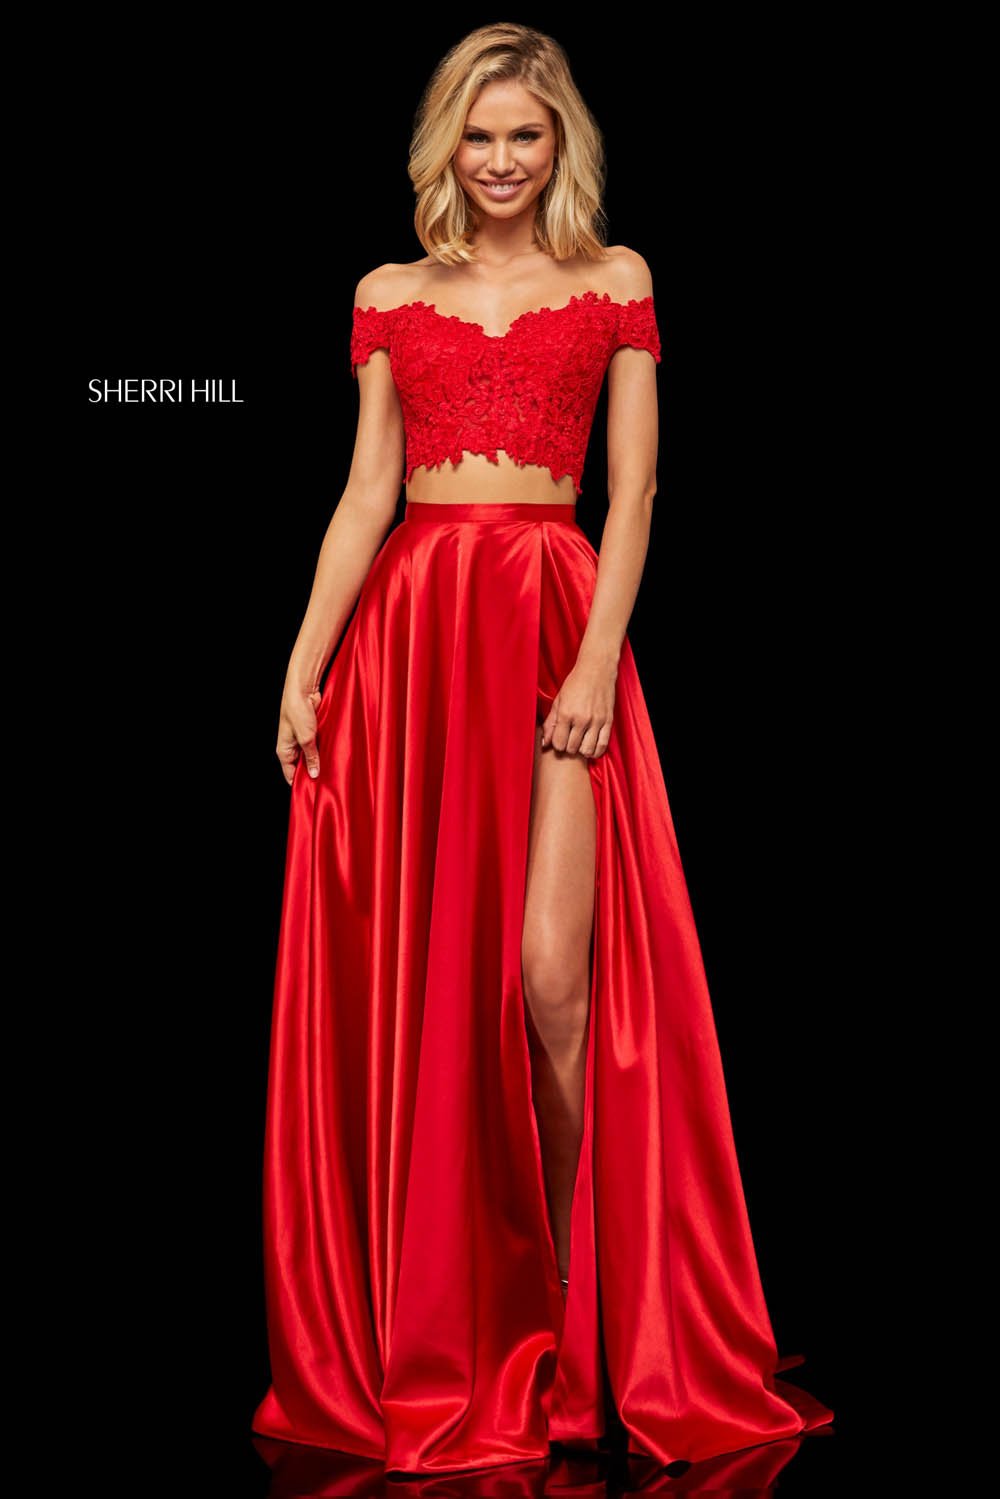 Sherri Hill 52567 dress images in these colors: Ivory, Red, Black, Orange, Eggplant, Rose, Teal, Peacock, Mocha, Yellow.